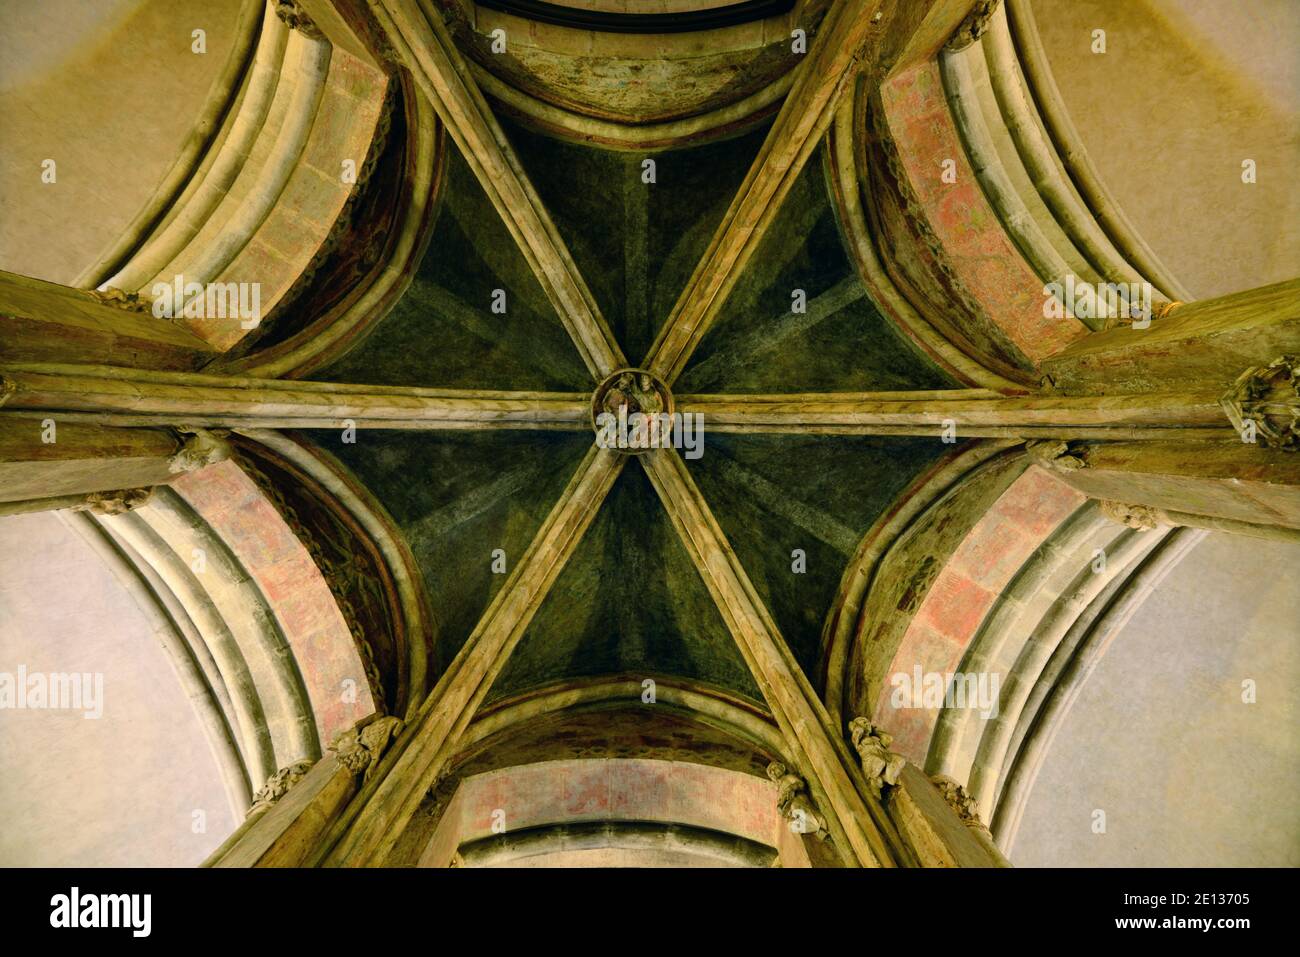 Romanesque Crypt Roof or Hexagonal Ceiling of the Basilica of Saint Sernin Church Toulouse France Stock Photo